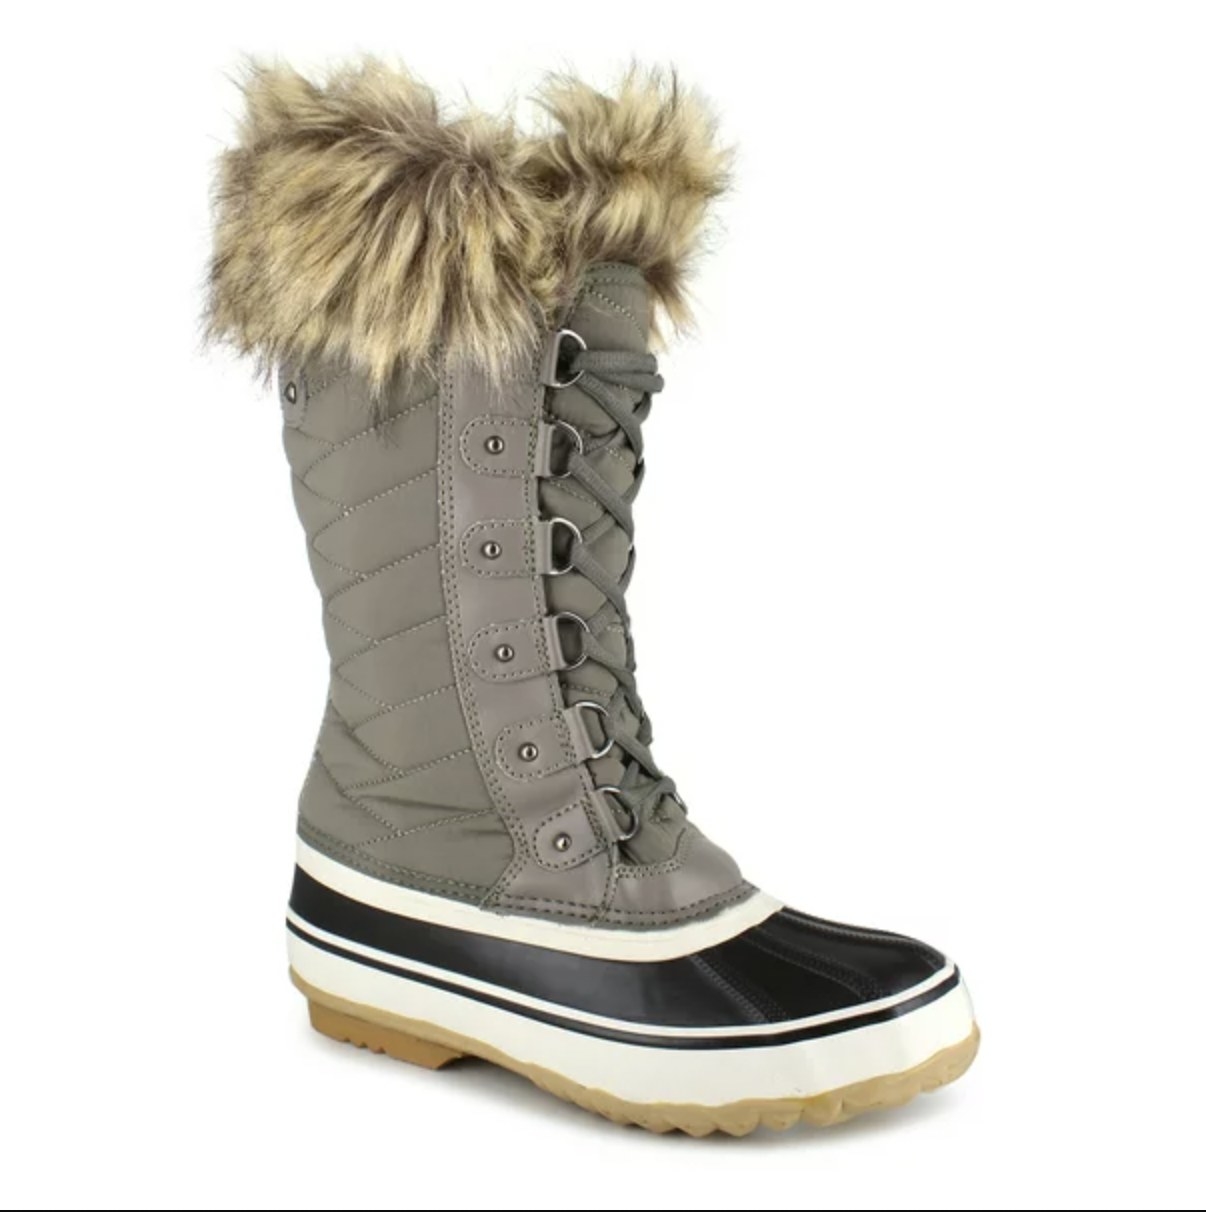 A grey lace up snow boot with a black and white rubber toe